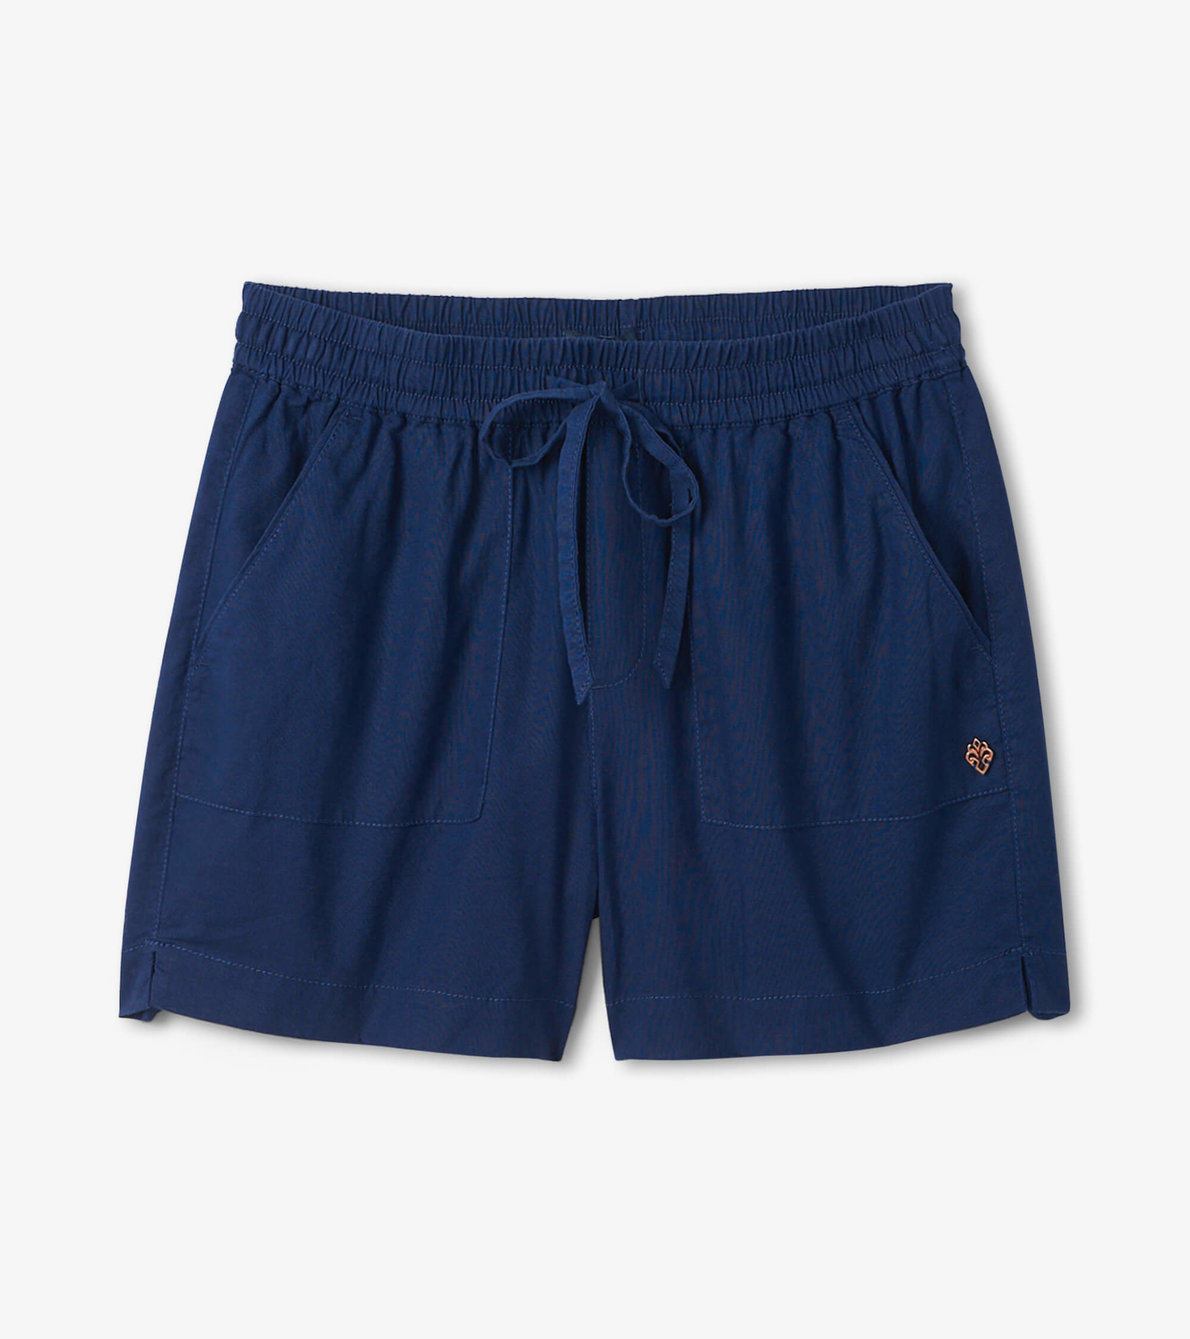 View larger image of Everywhere Shorts - Patriot Blue